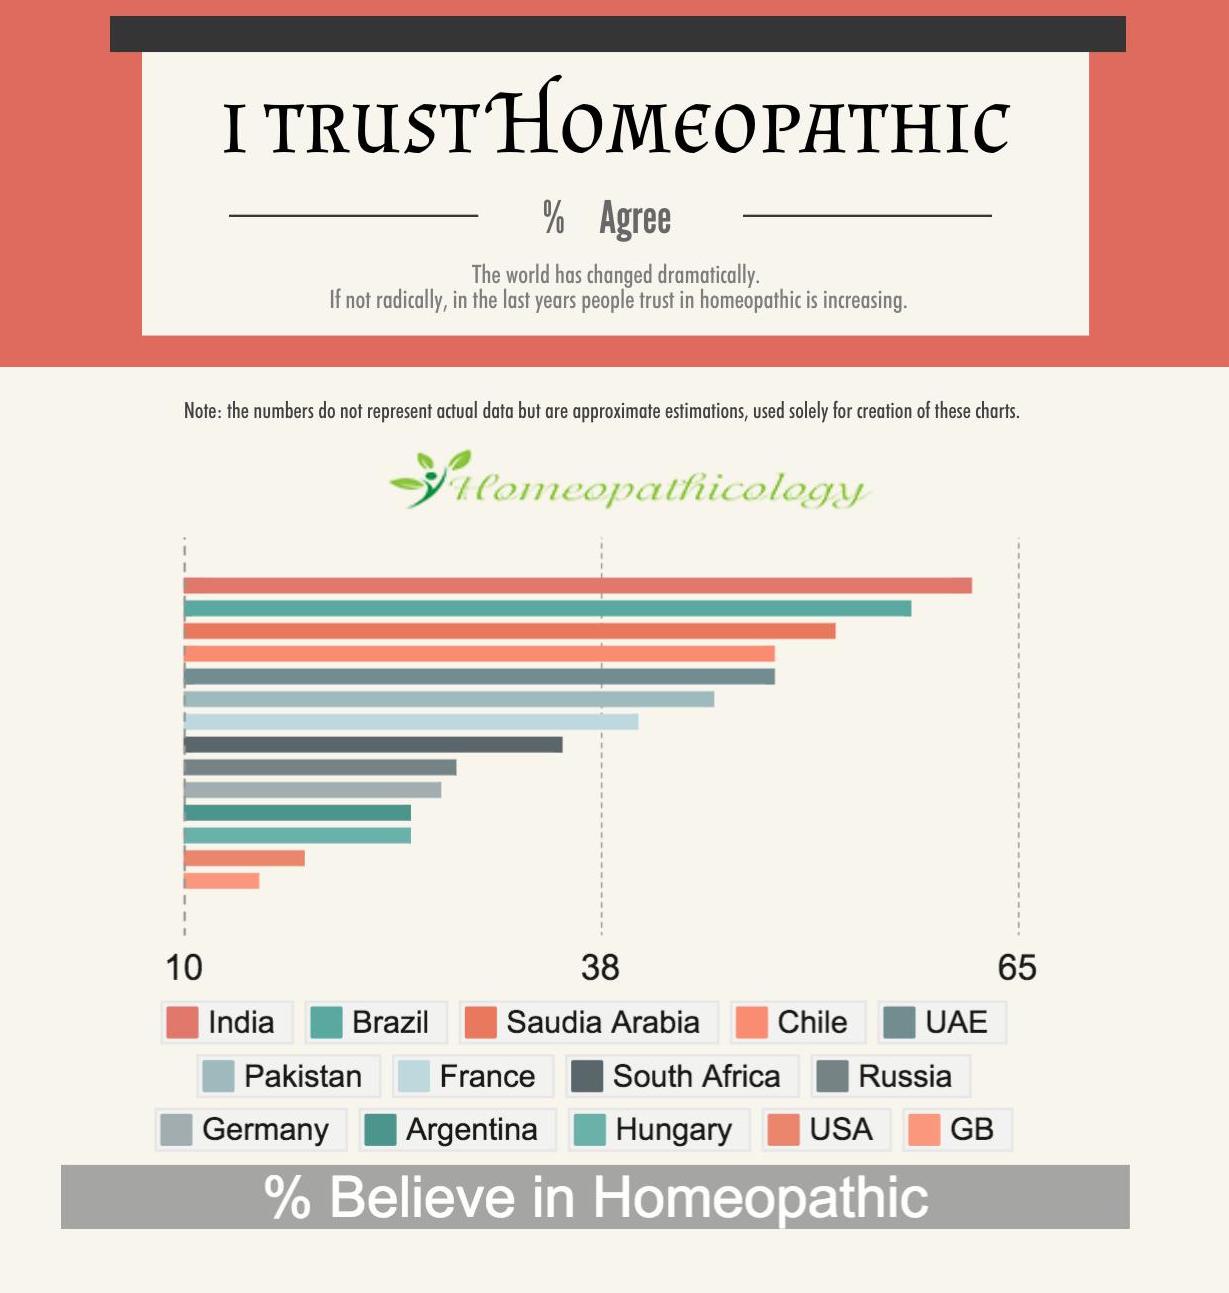 Who Trust in Homeopathic